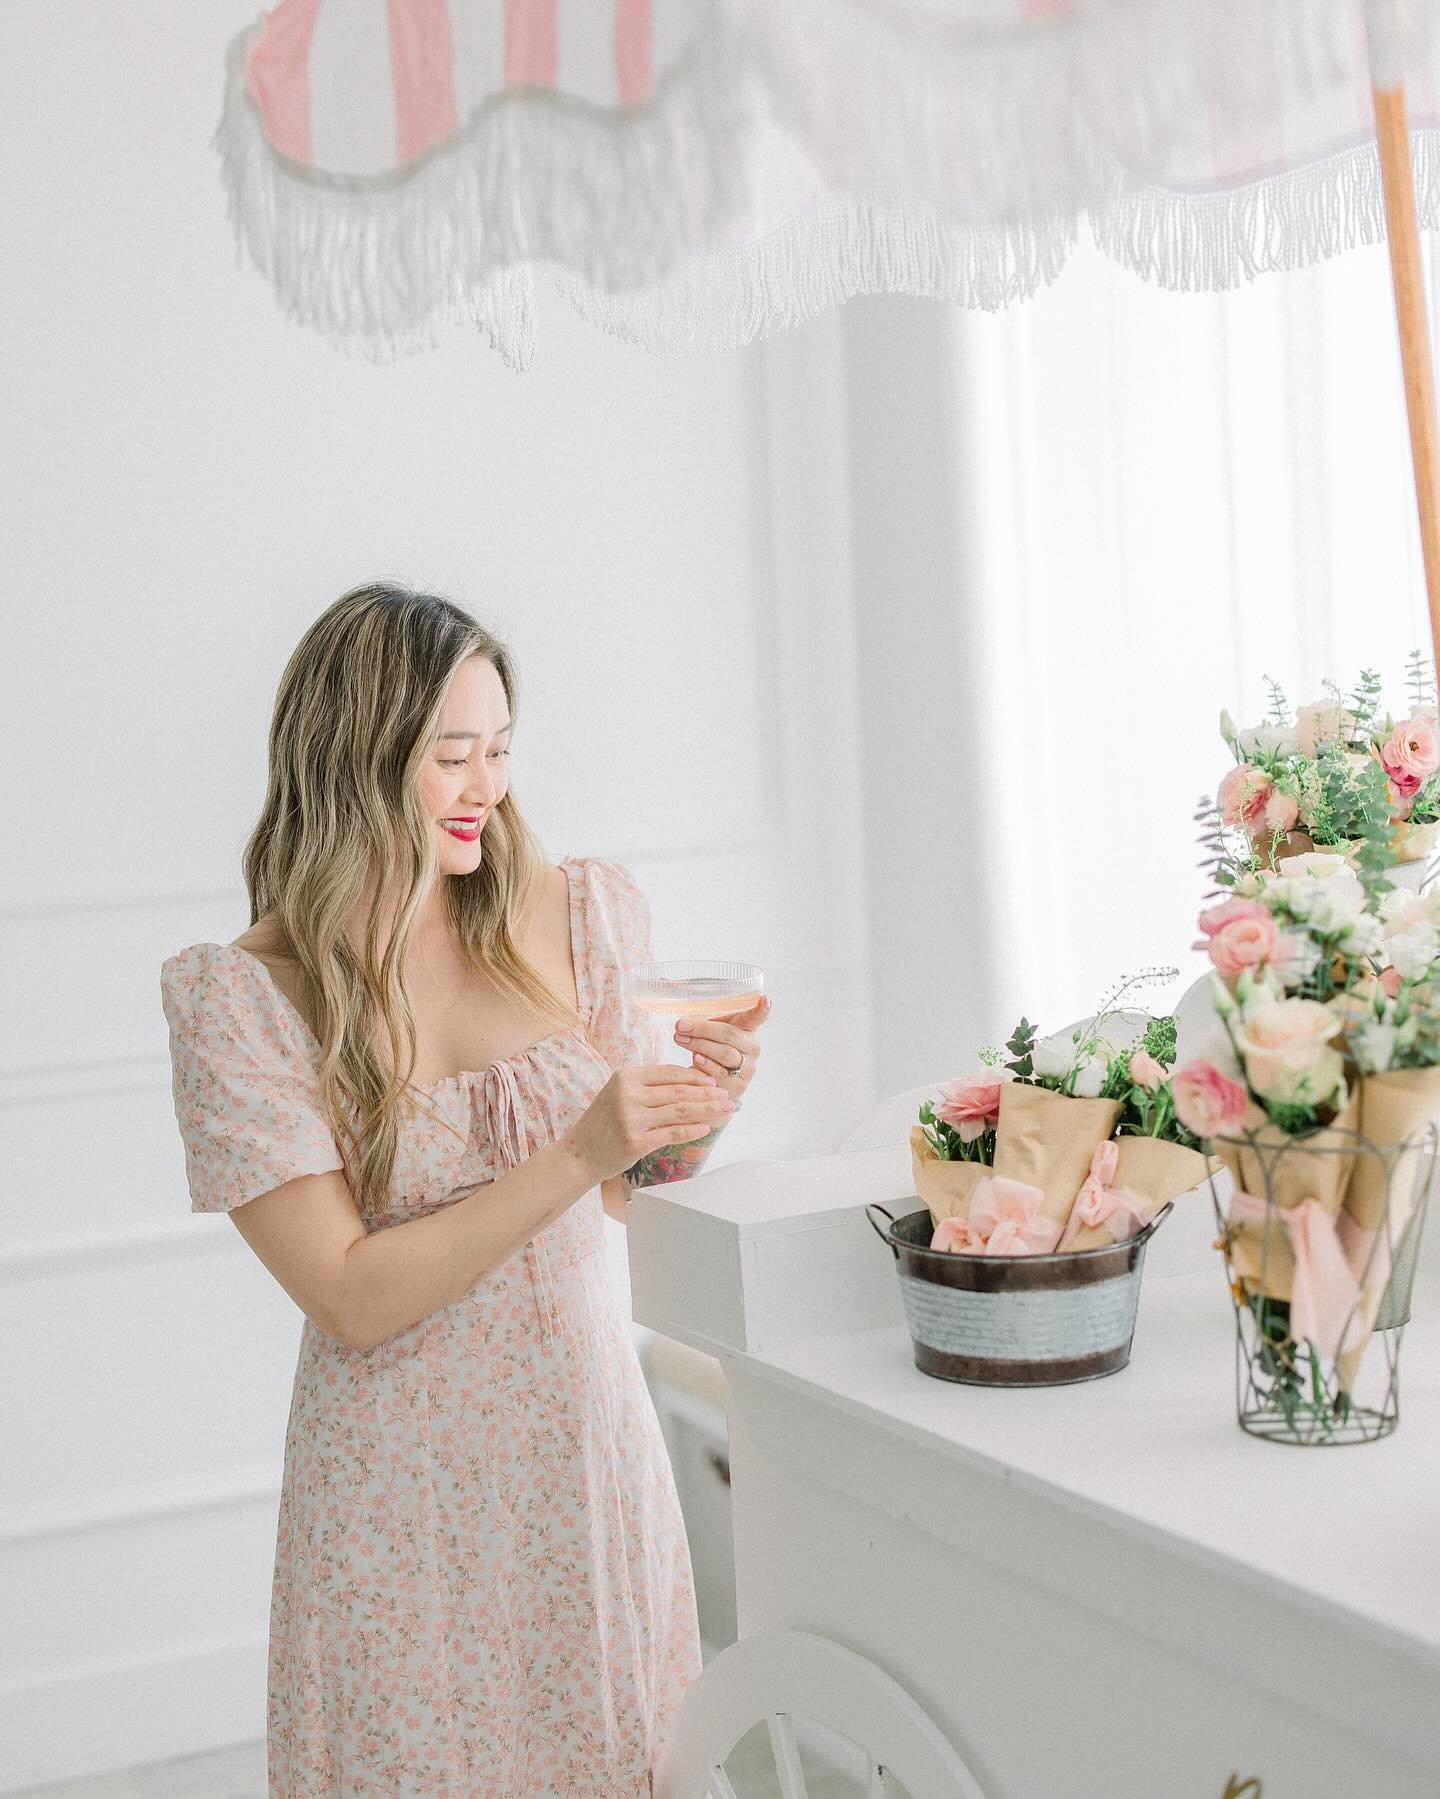 Our first Bloom cart made its appearance last weekend at Bao&rsquo;s Birthday Brunch with premade mini bouquets. Captured beautifully by @baoyang.photos 🌸🥰 Thank you so much for having us be a part of your birthday! 😍🤍

Stay tuned for a new bloom